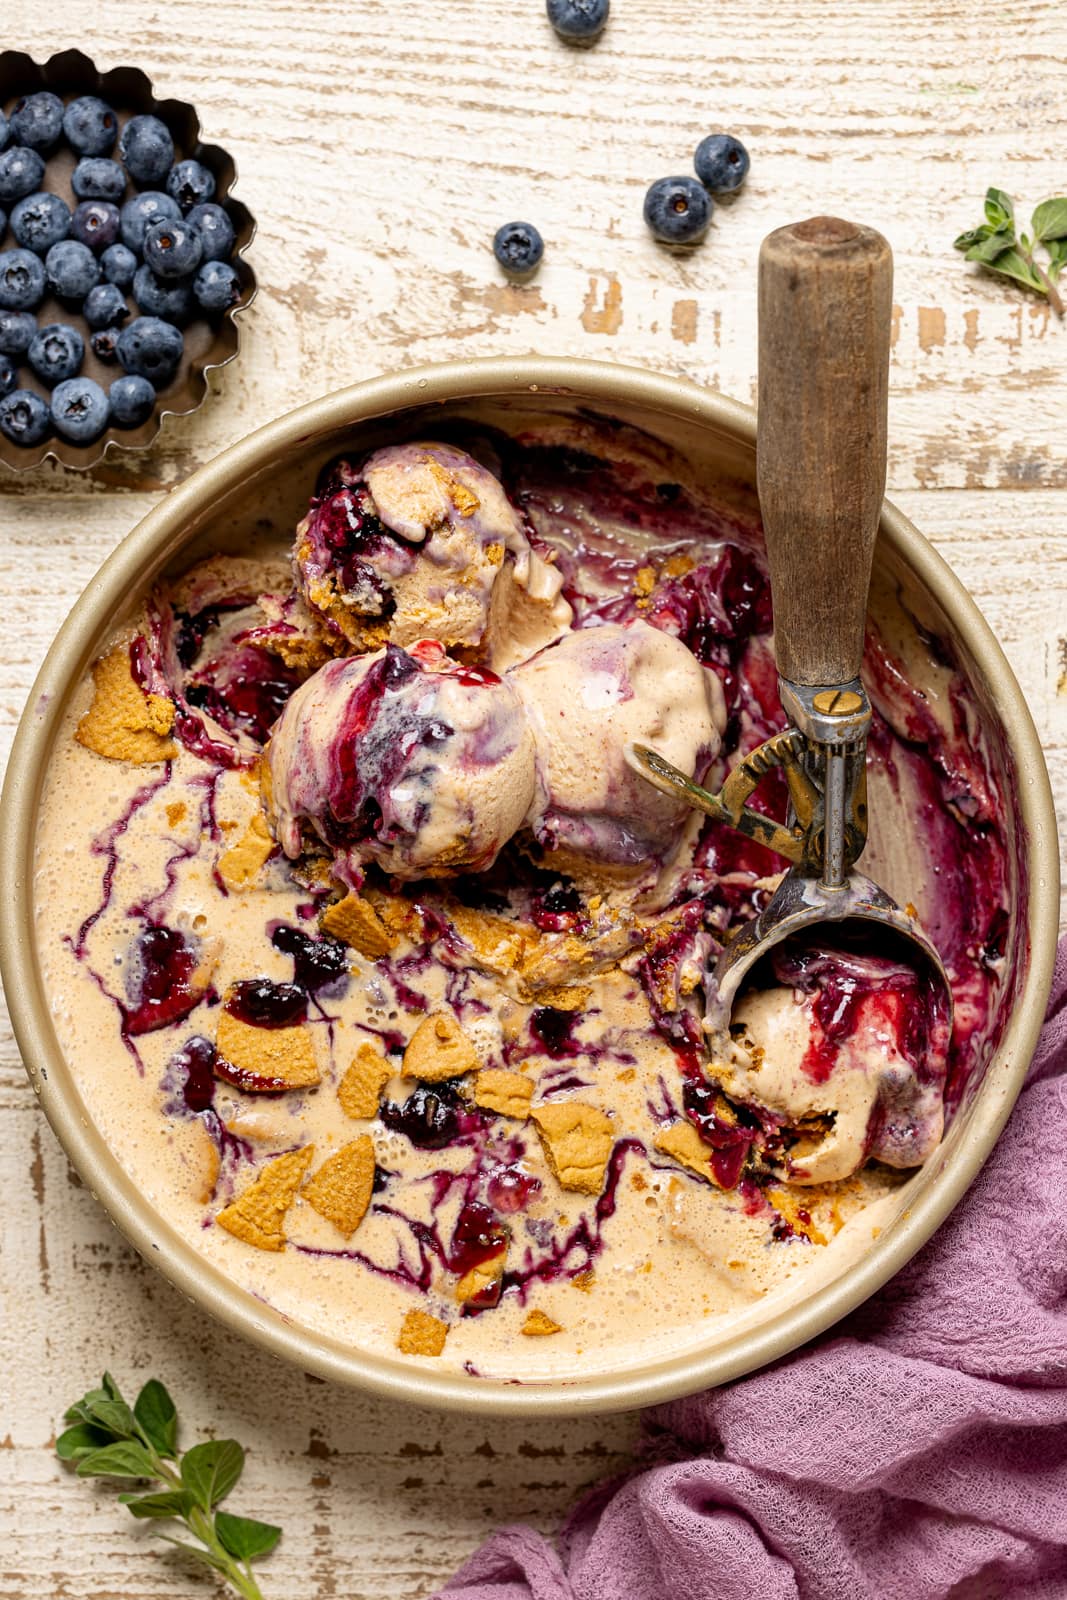 Scoops of ice cream in a round pan with a scoop and blueberries. 